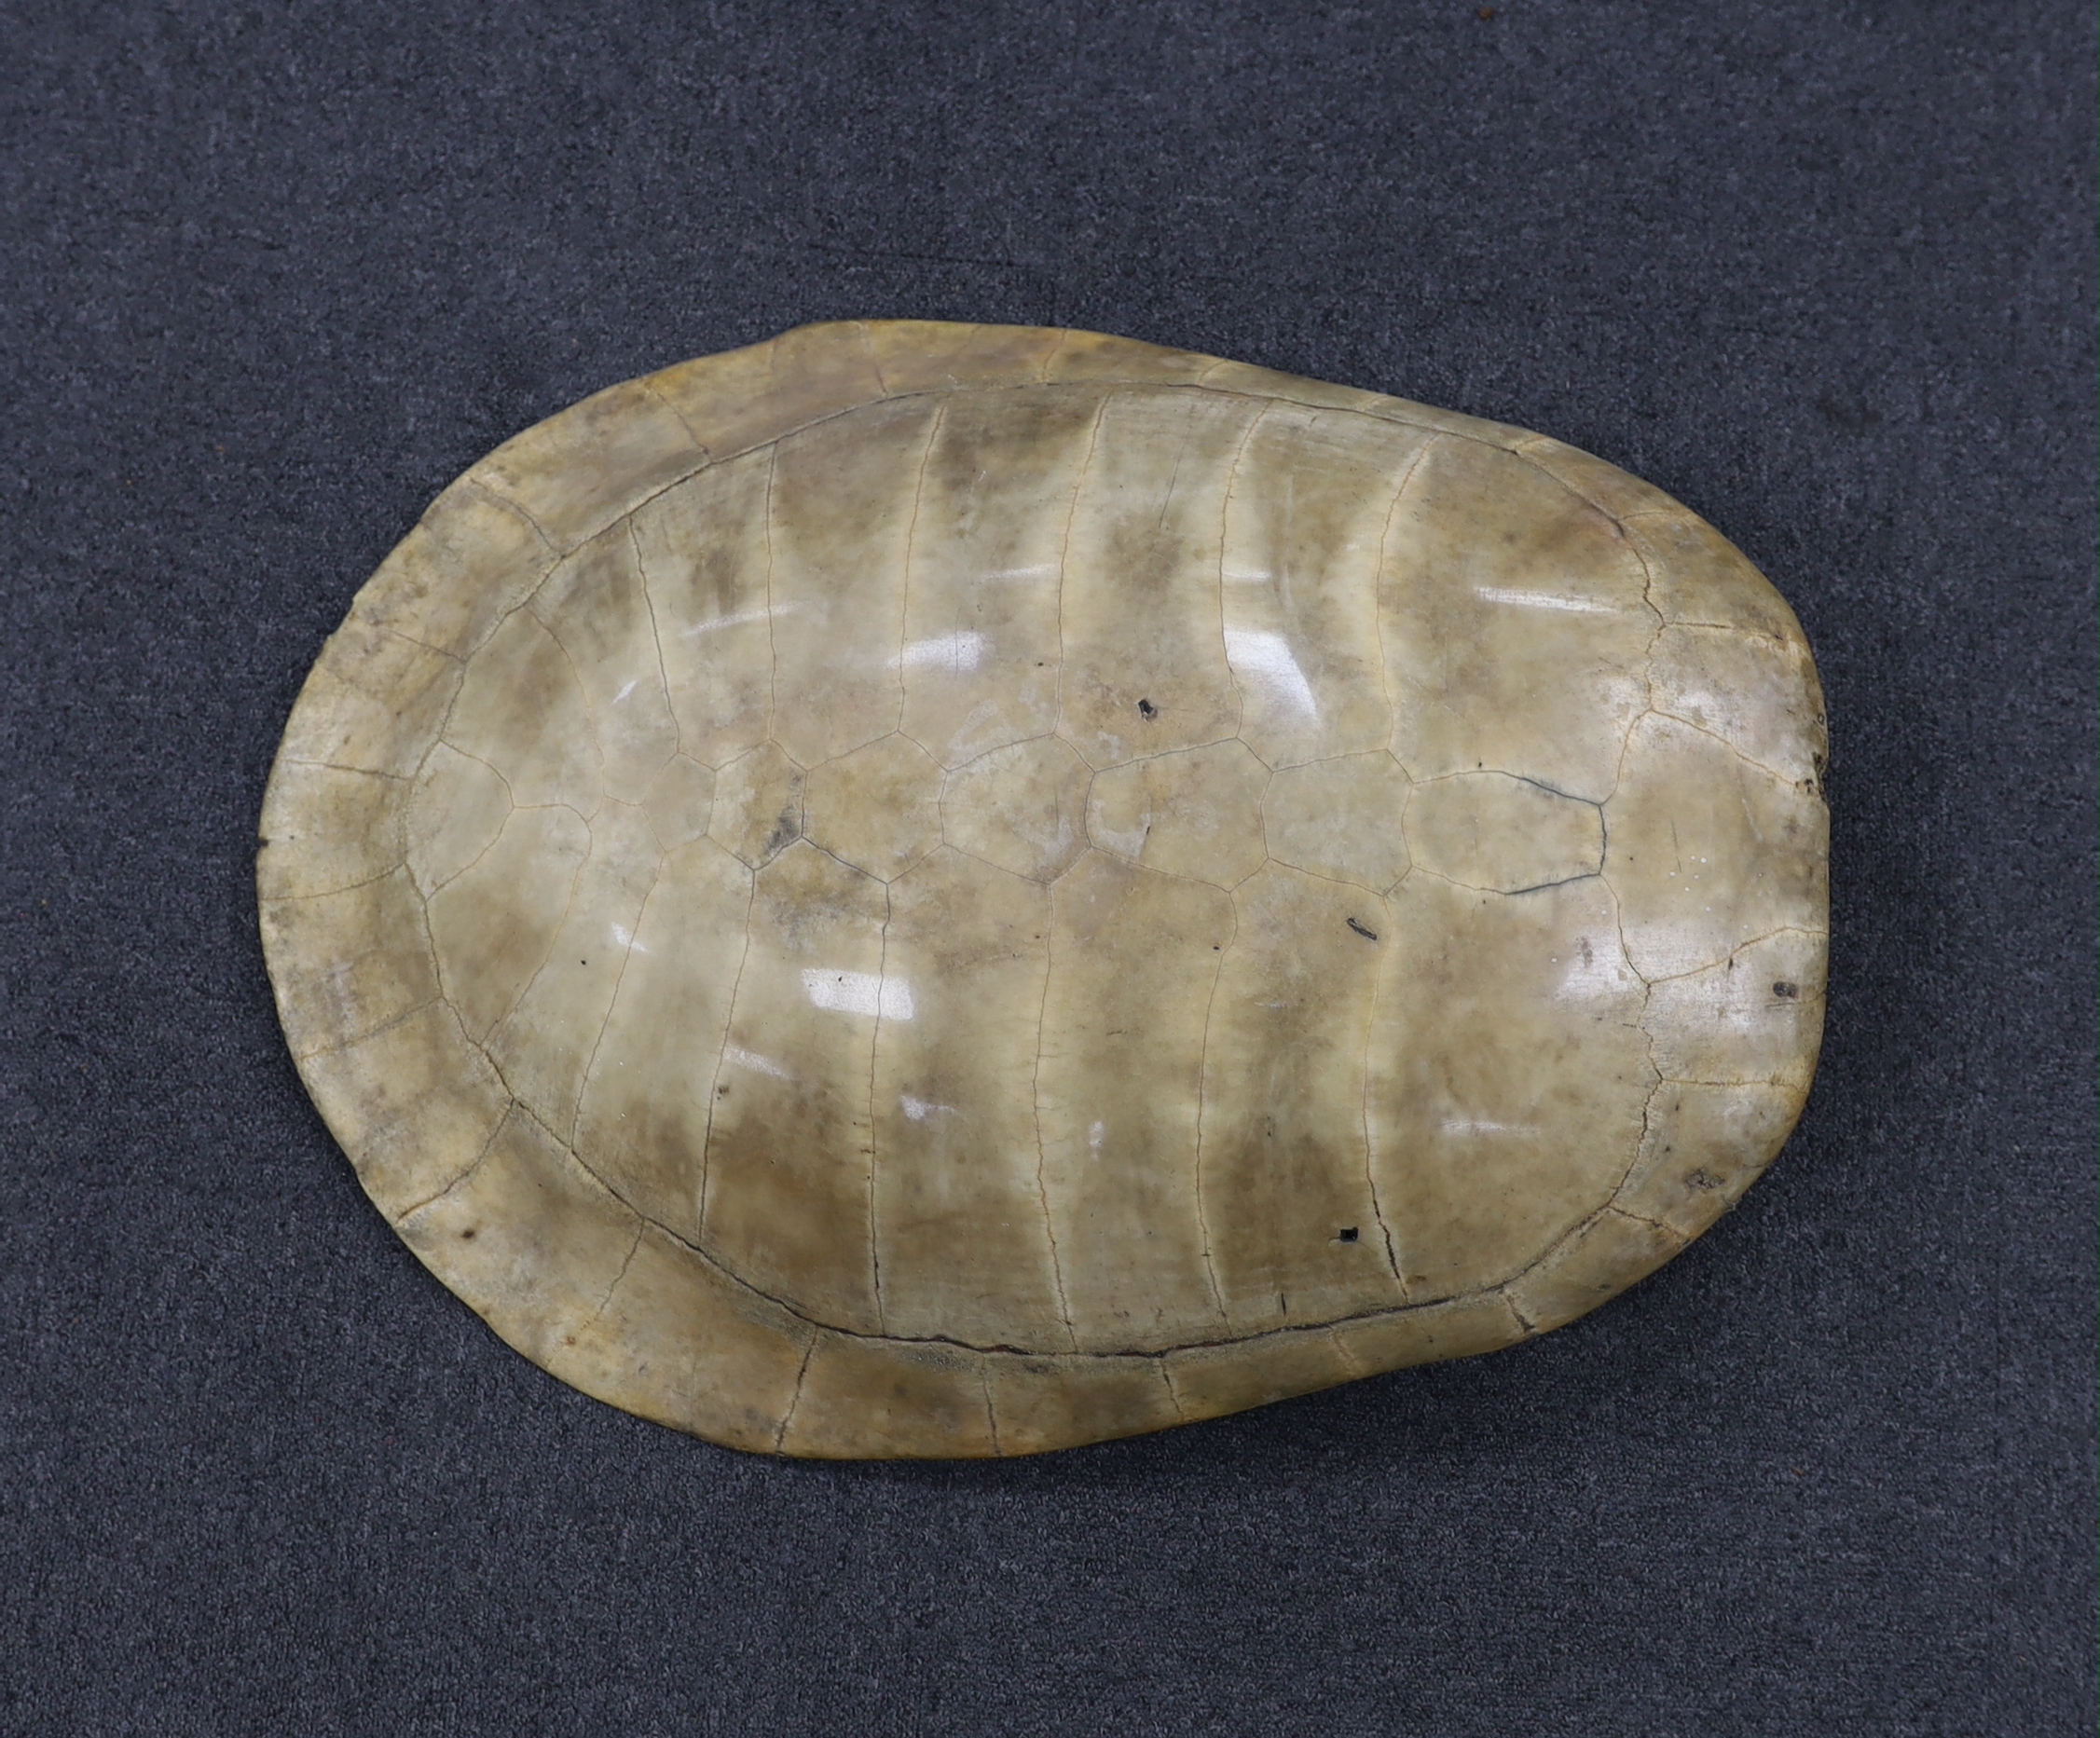 A Great South American River Turtle carapace (also known as an Arrau turtle or Tartaruga) 75cm in length, pre 1947 example, CITES listed Annex B, Appendix II, however will require an Export permit if sold and shipped out